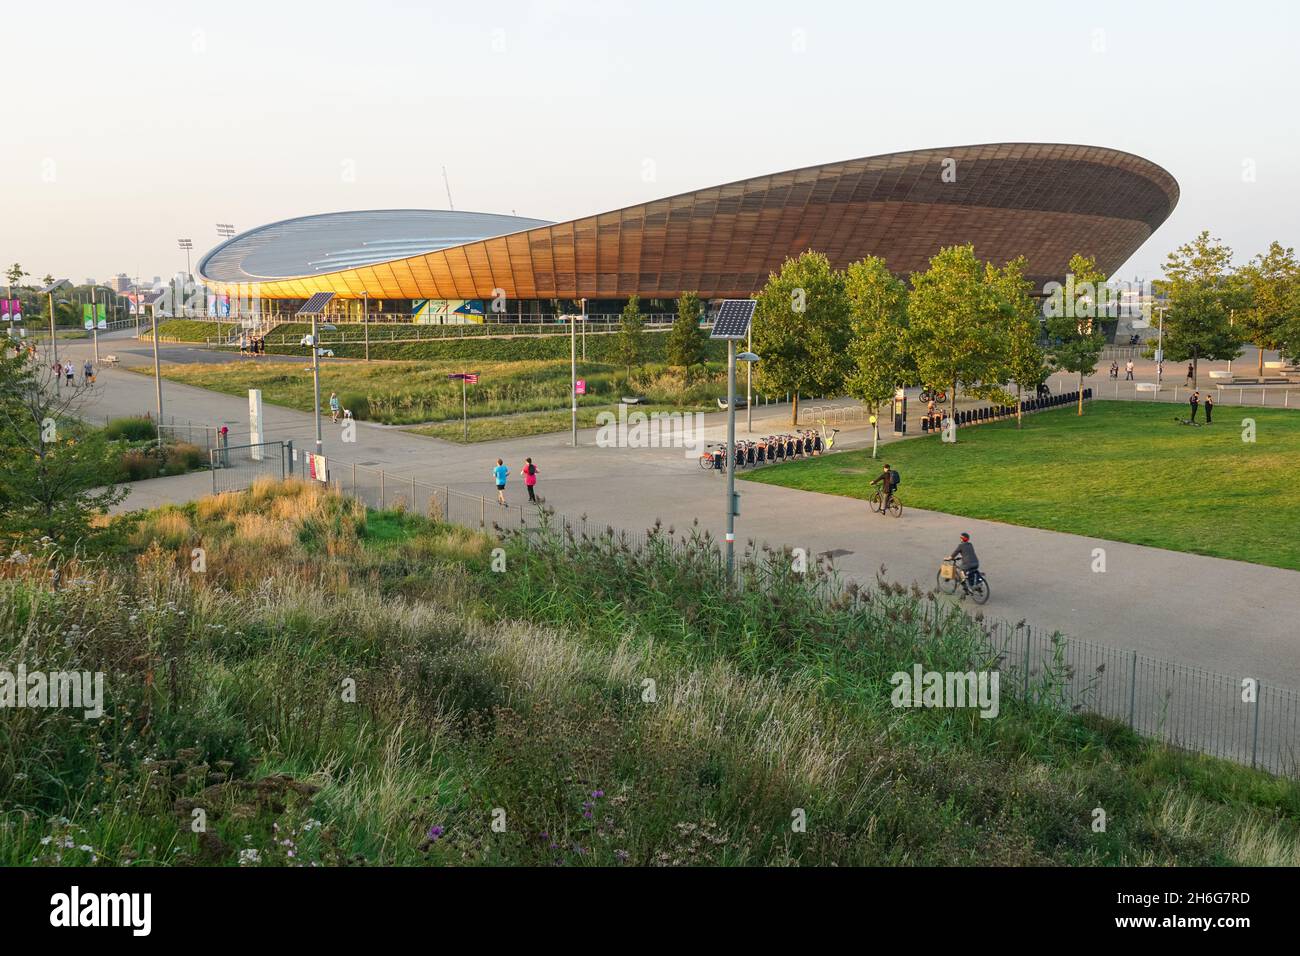 Lee Valley VeloPark at Queen Elizabeth Olympic Park, London England United Kingdom UK Stock Photo